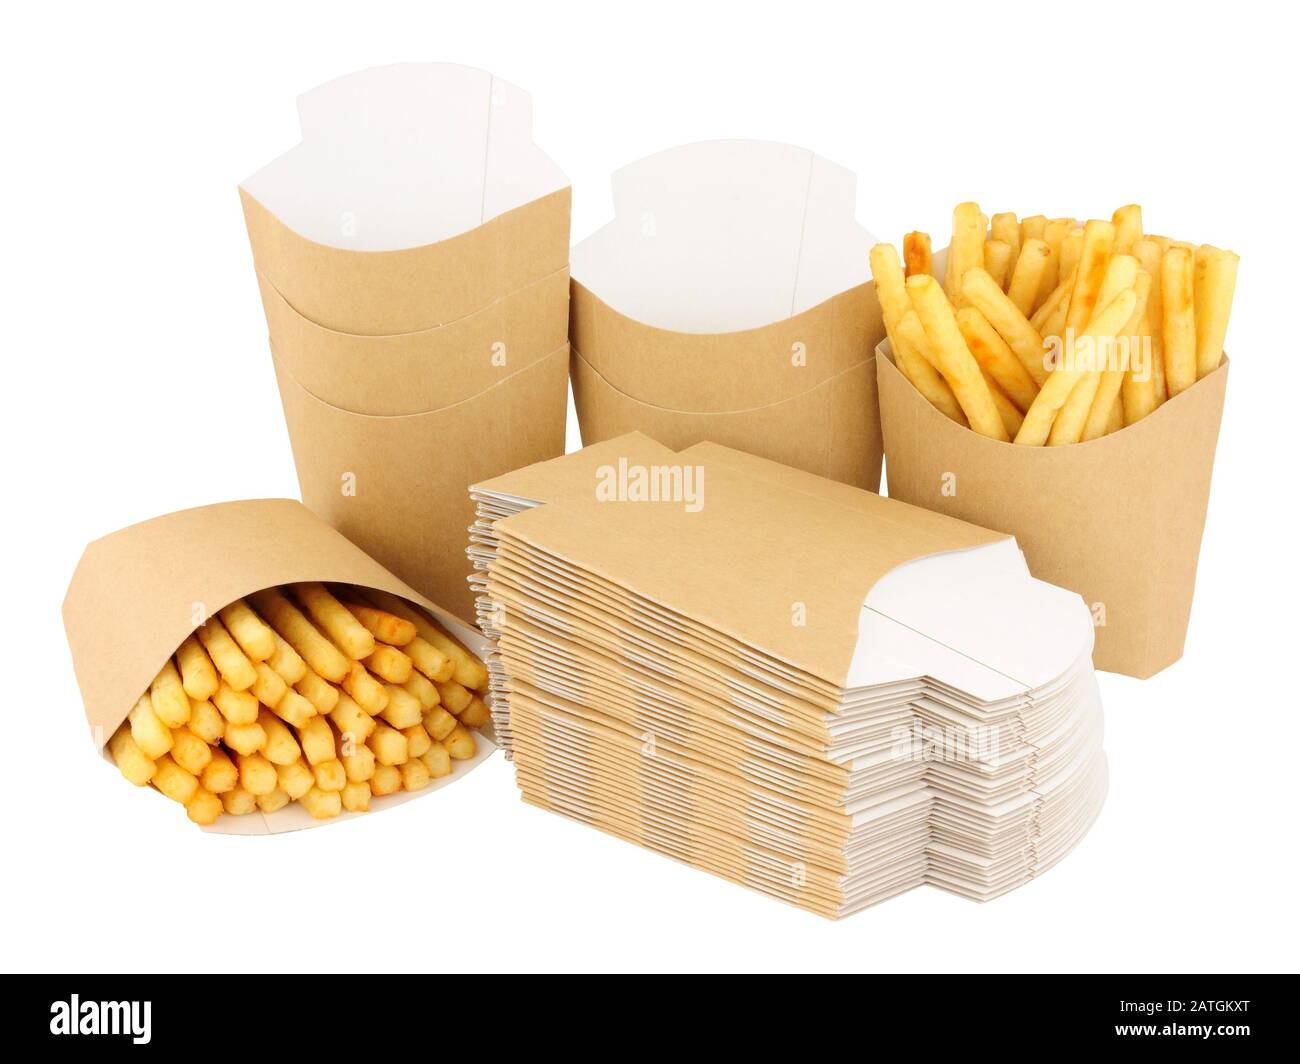 French fries in paper box to go Stock Photo - Alamy